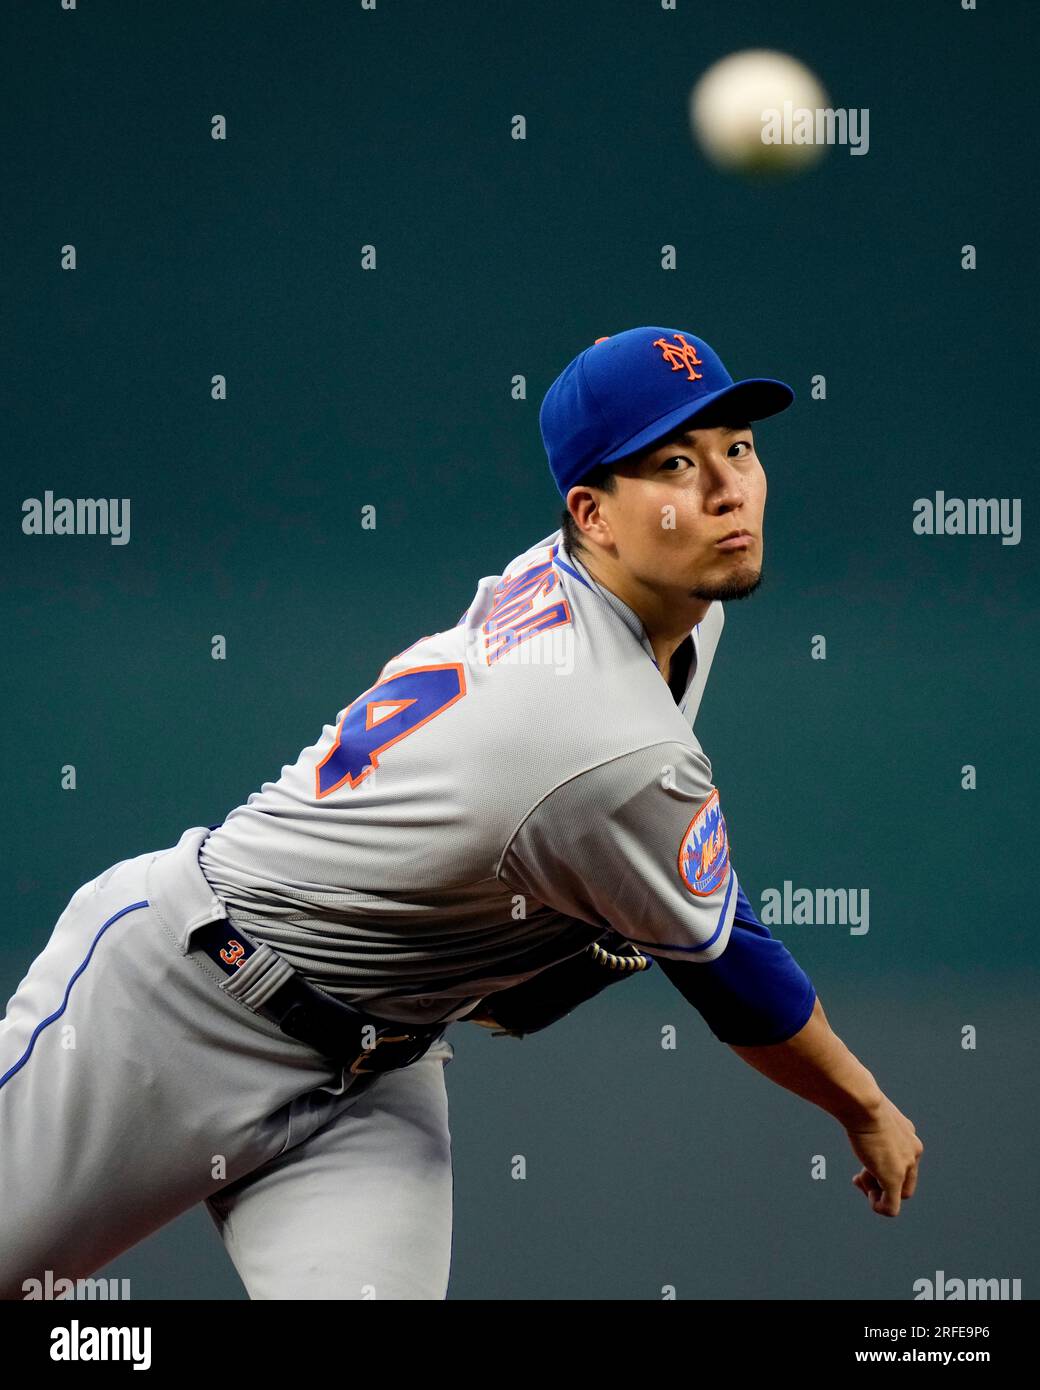 Photo: New York Mets Press Conference for Pitcher Kodai Senga from